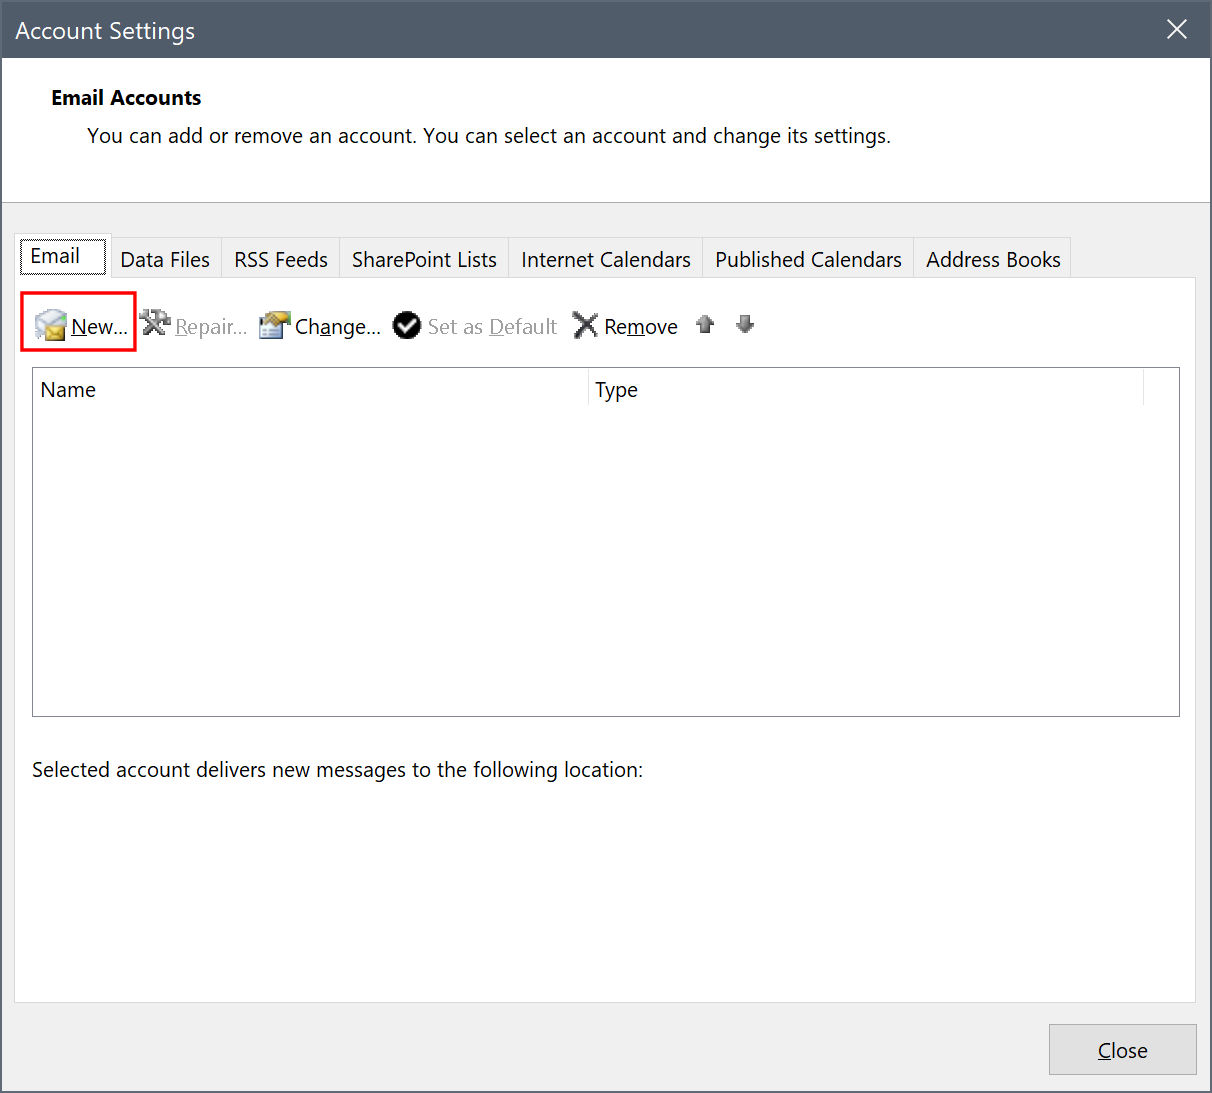 Click New in the Account Settings dialog